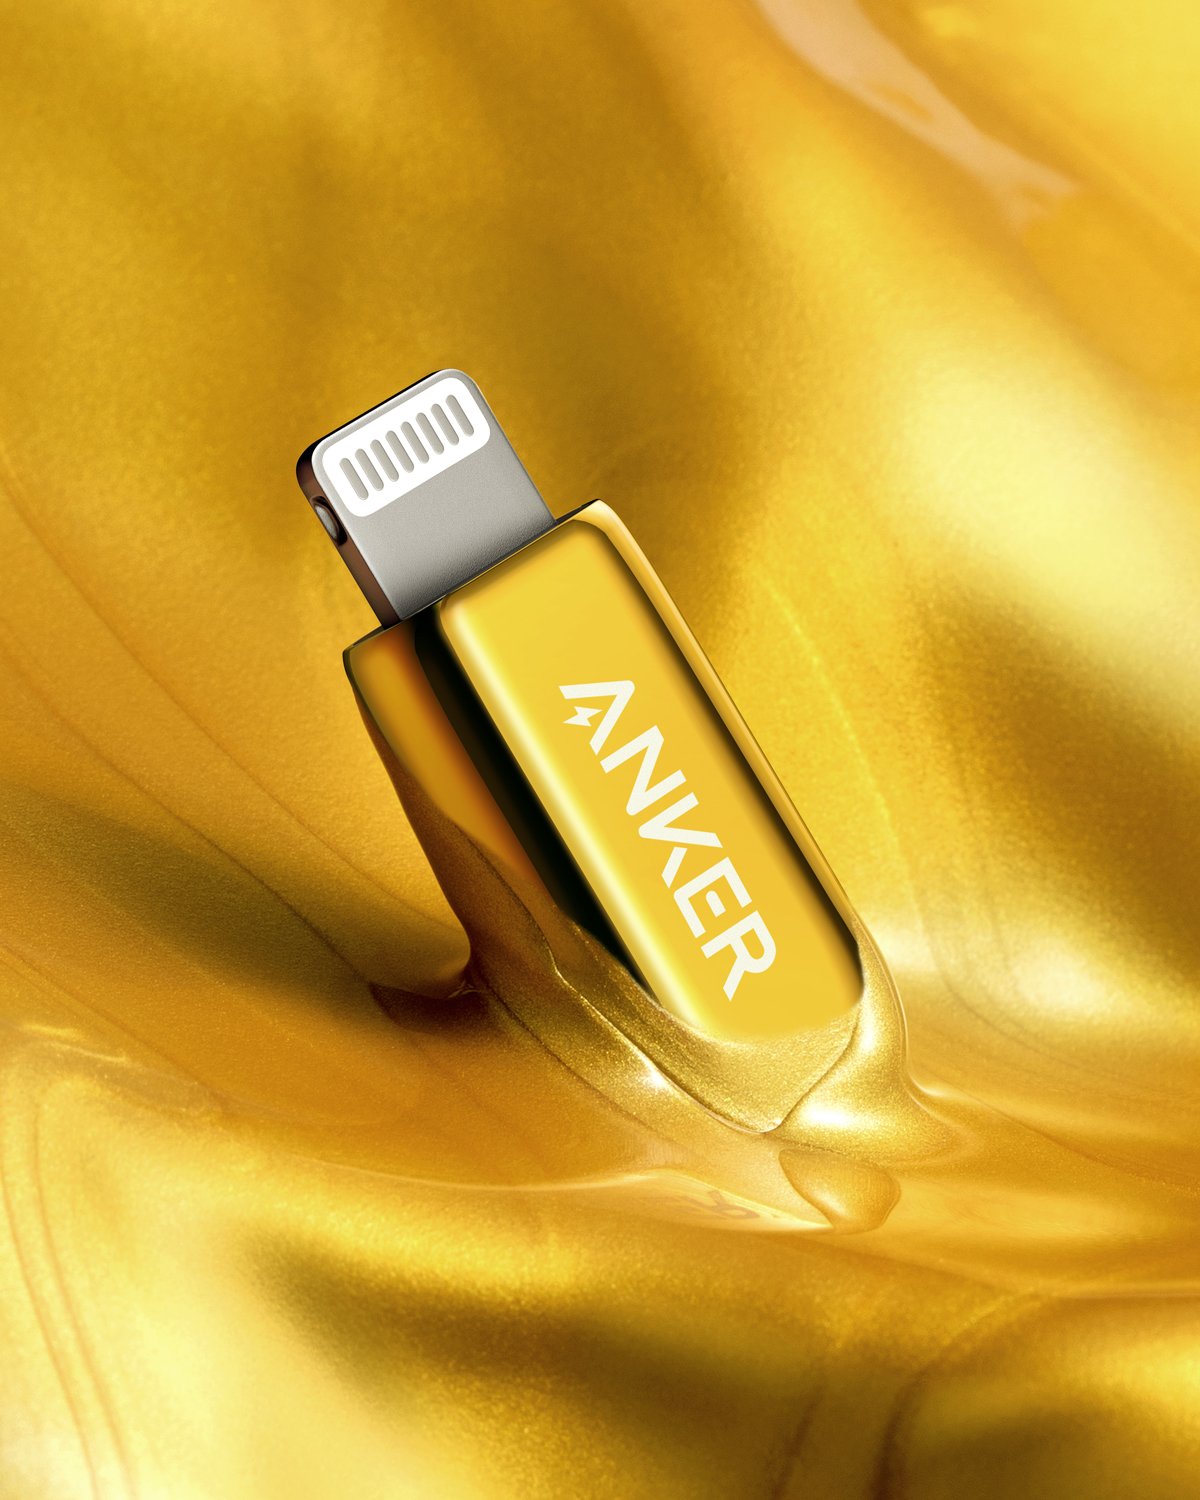 https://www.imore.com/sites/imore.com/files/styles/xlarge/public/field/image/2020/05/anker-powerline-iii-24k-gold-edition-lifestyle-07.jpg?itok=DDl2_nIL